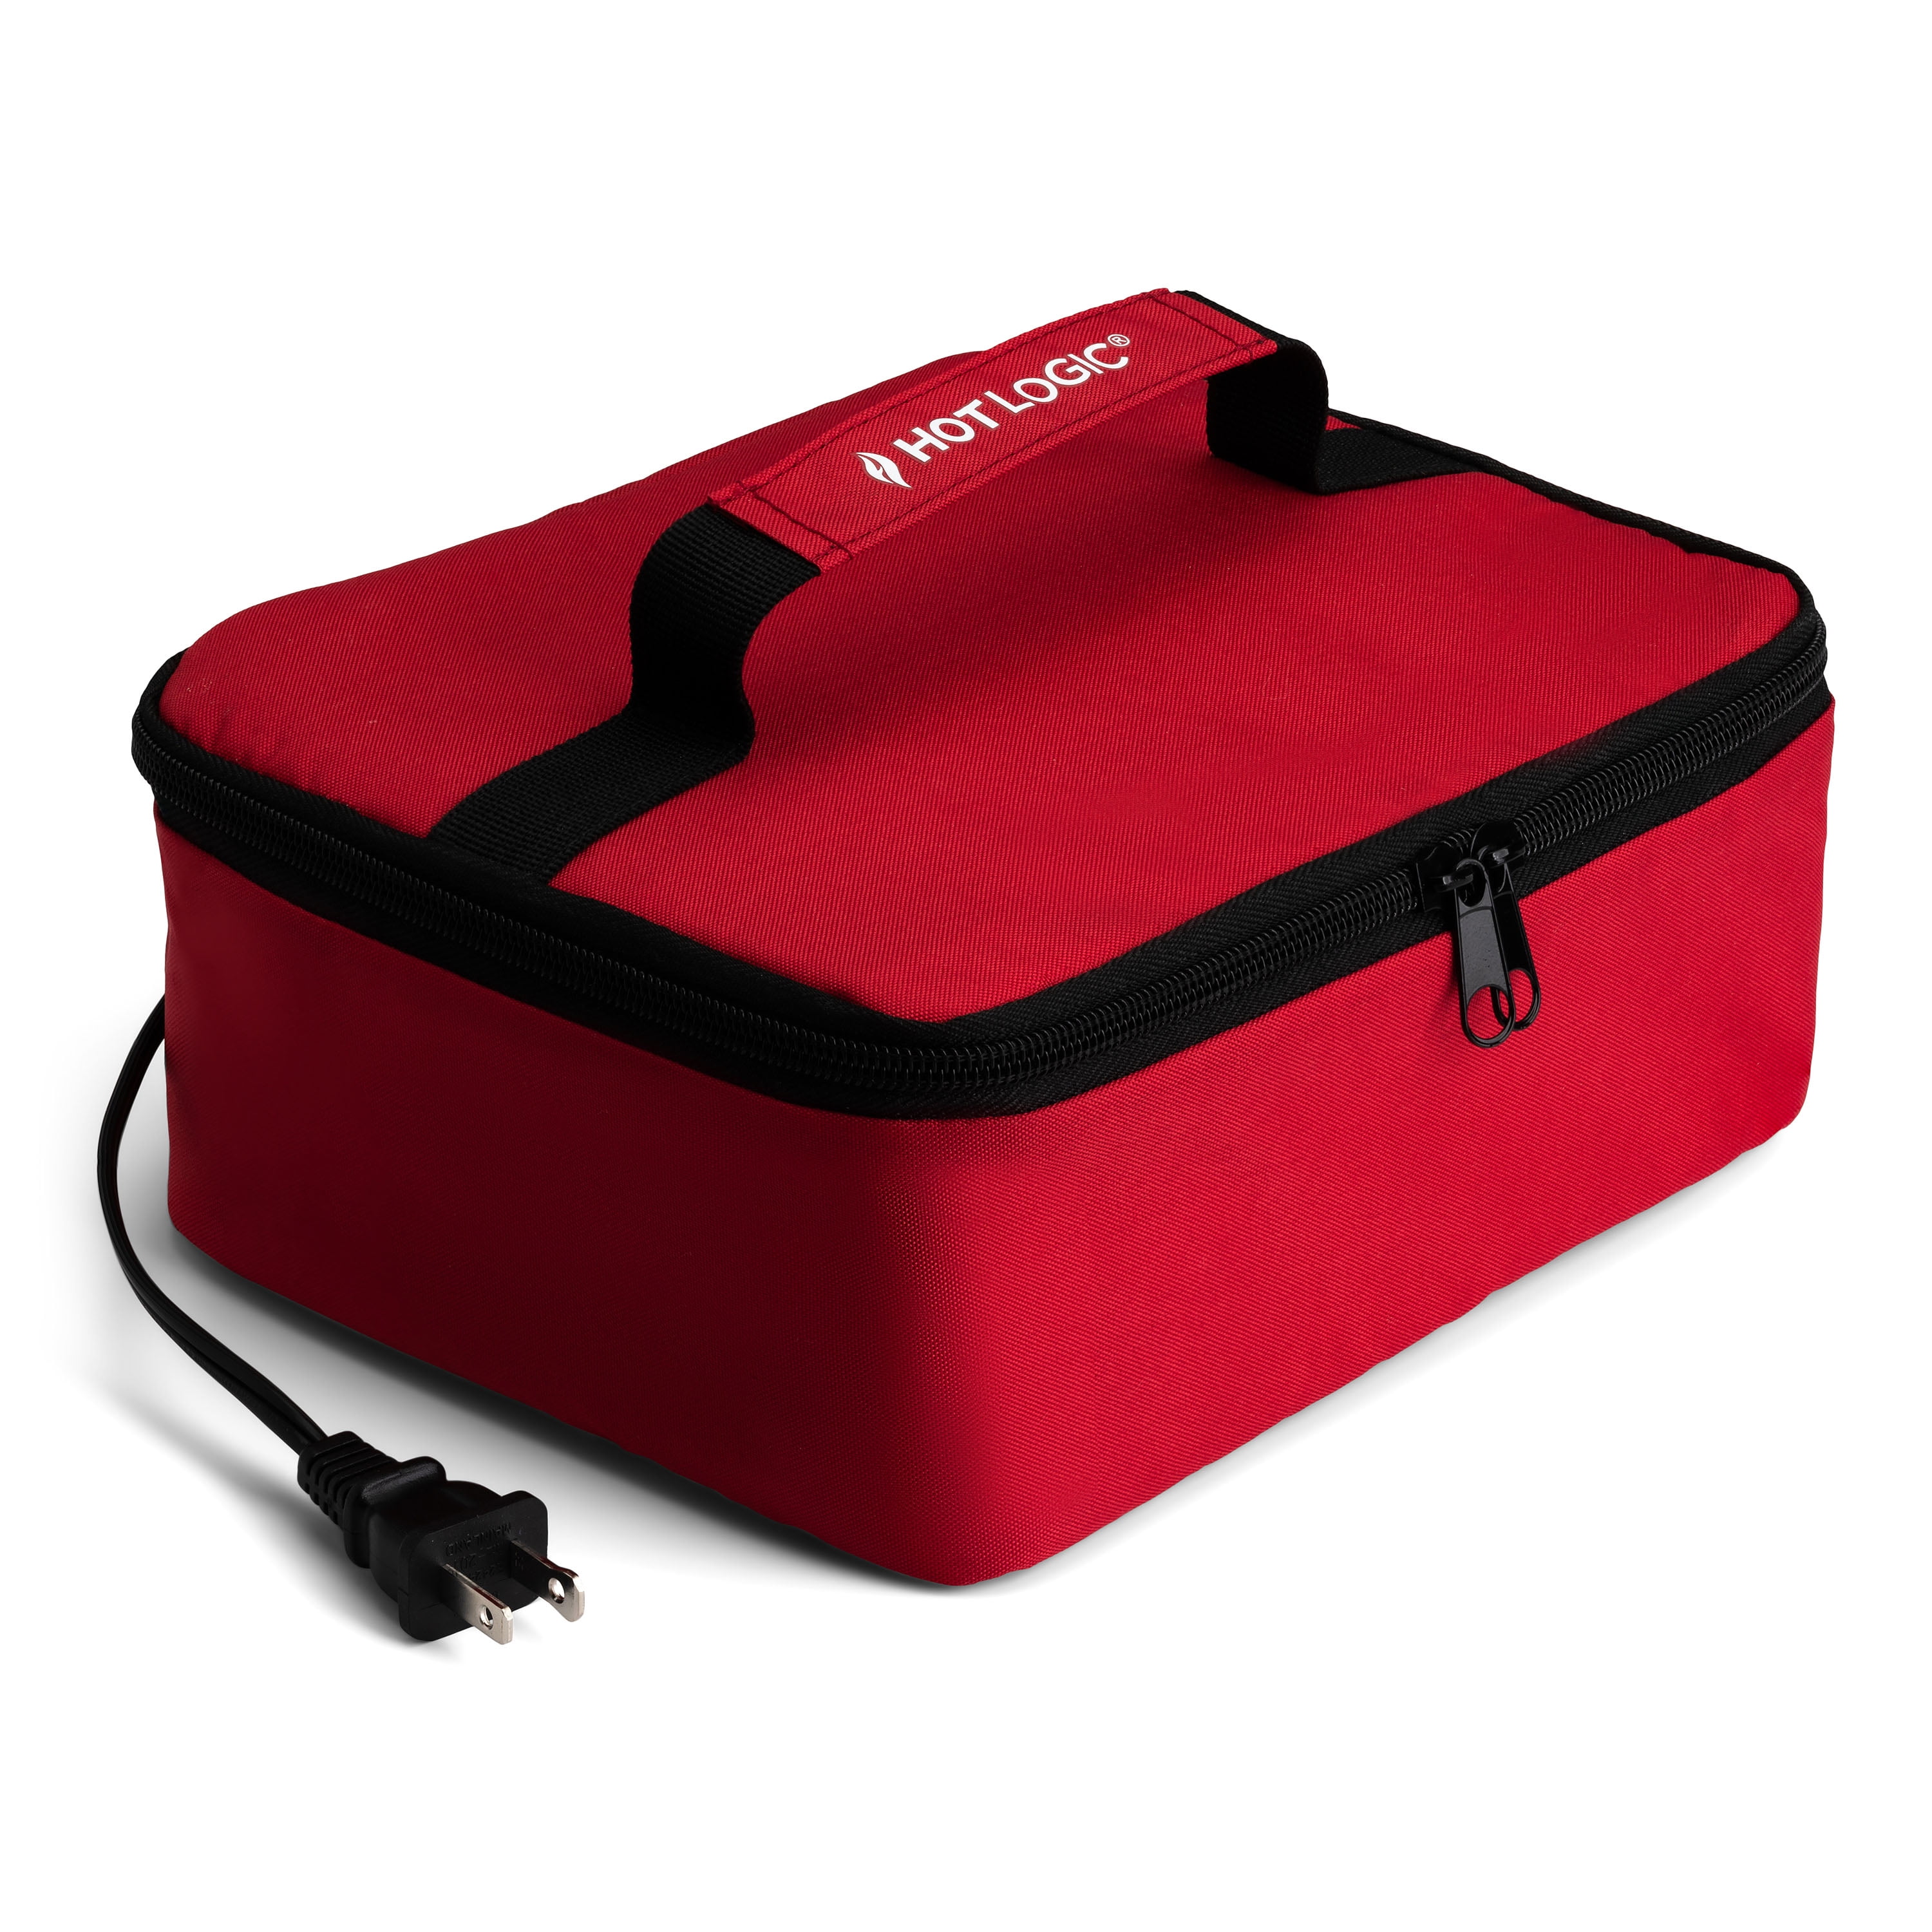 Hot Logic Mini Personal Portable Oven - Red 